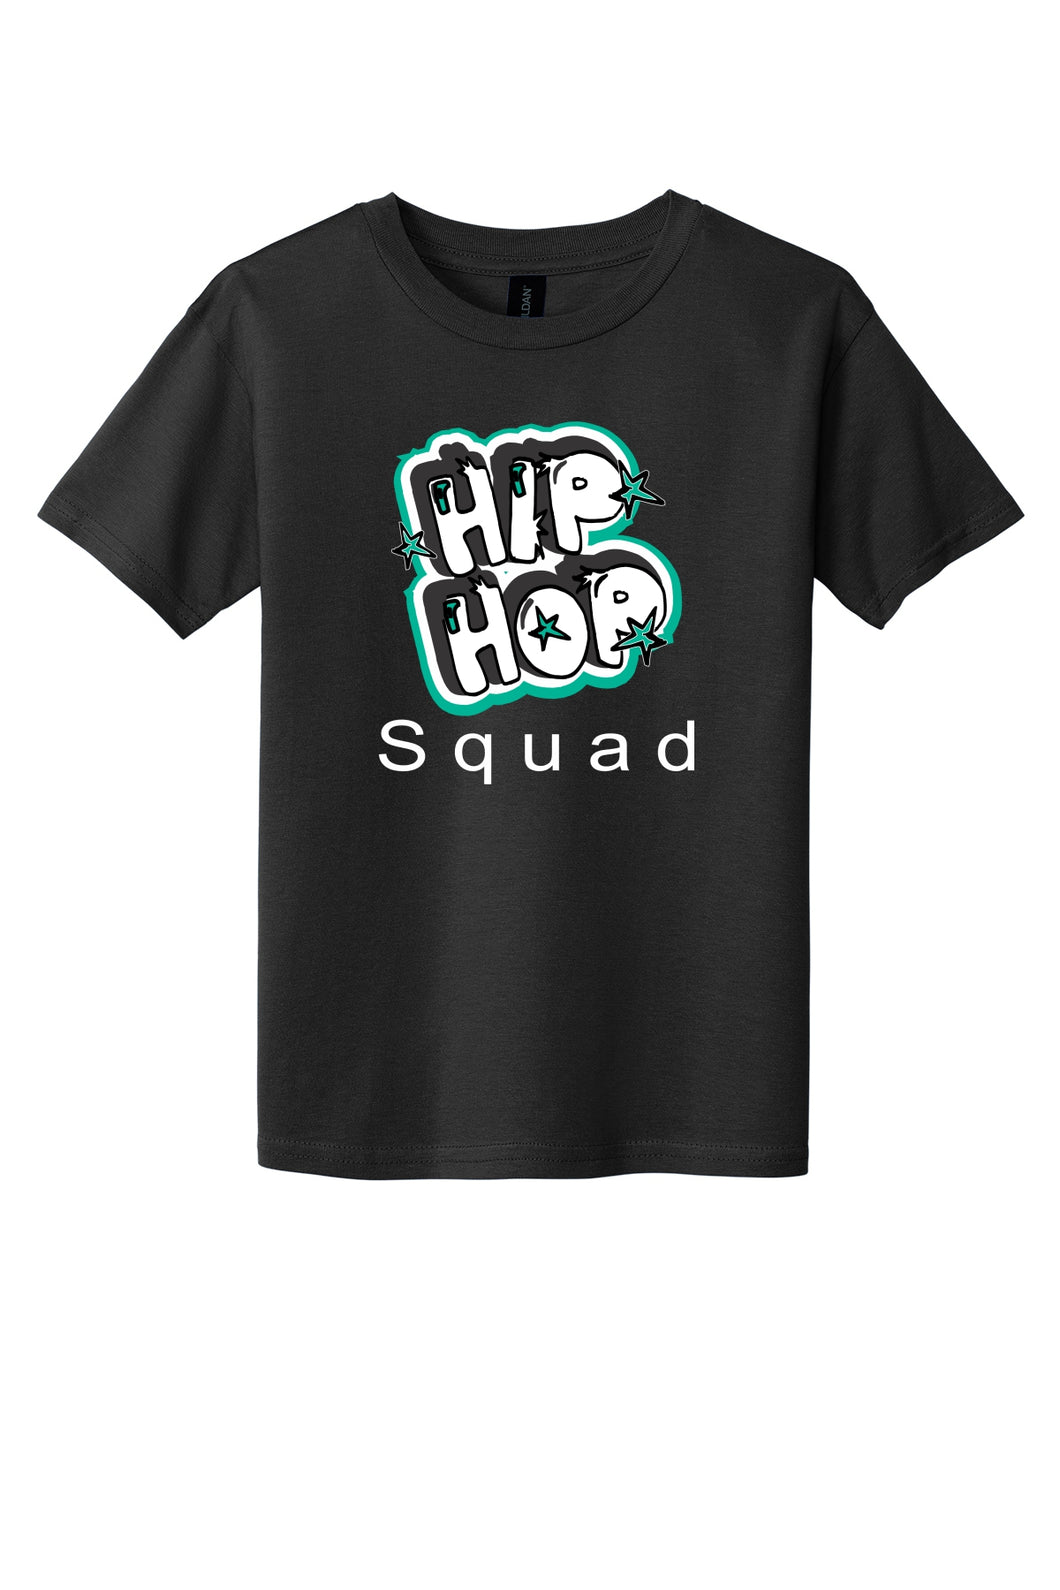 HIP HOP SQUAD SOFTSTYLE TEE - YOUTH